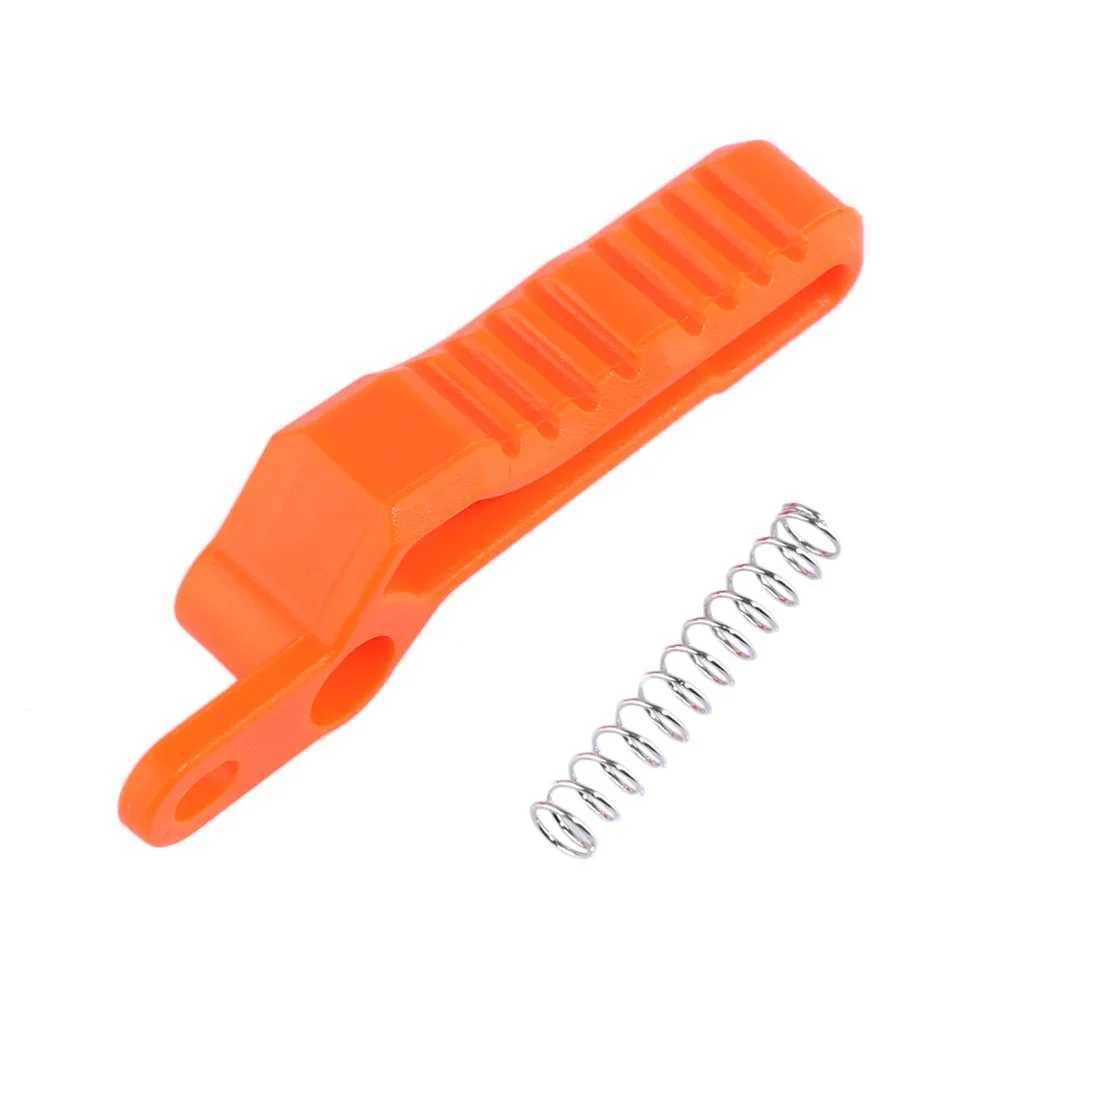 Gun Toys 2-piece/staff set extends the last stage of pusher modified toy accessories releasing clips to Nerf Stryfe 240307